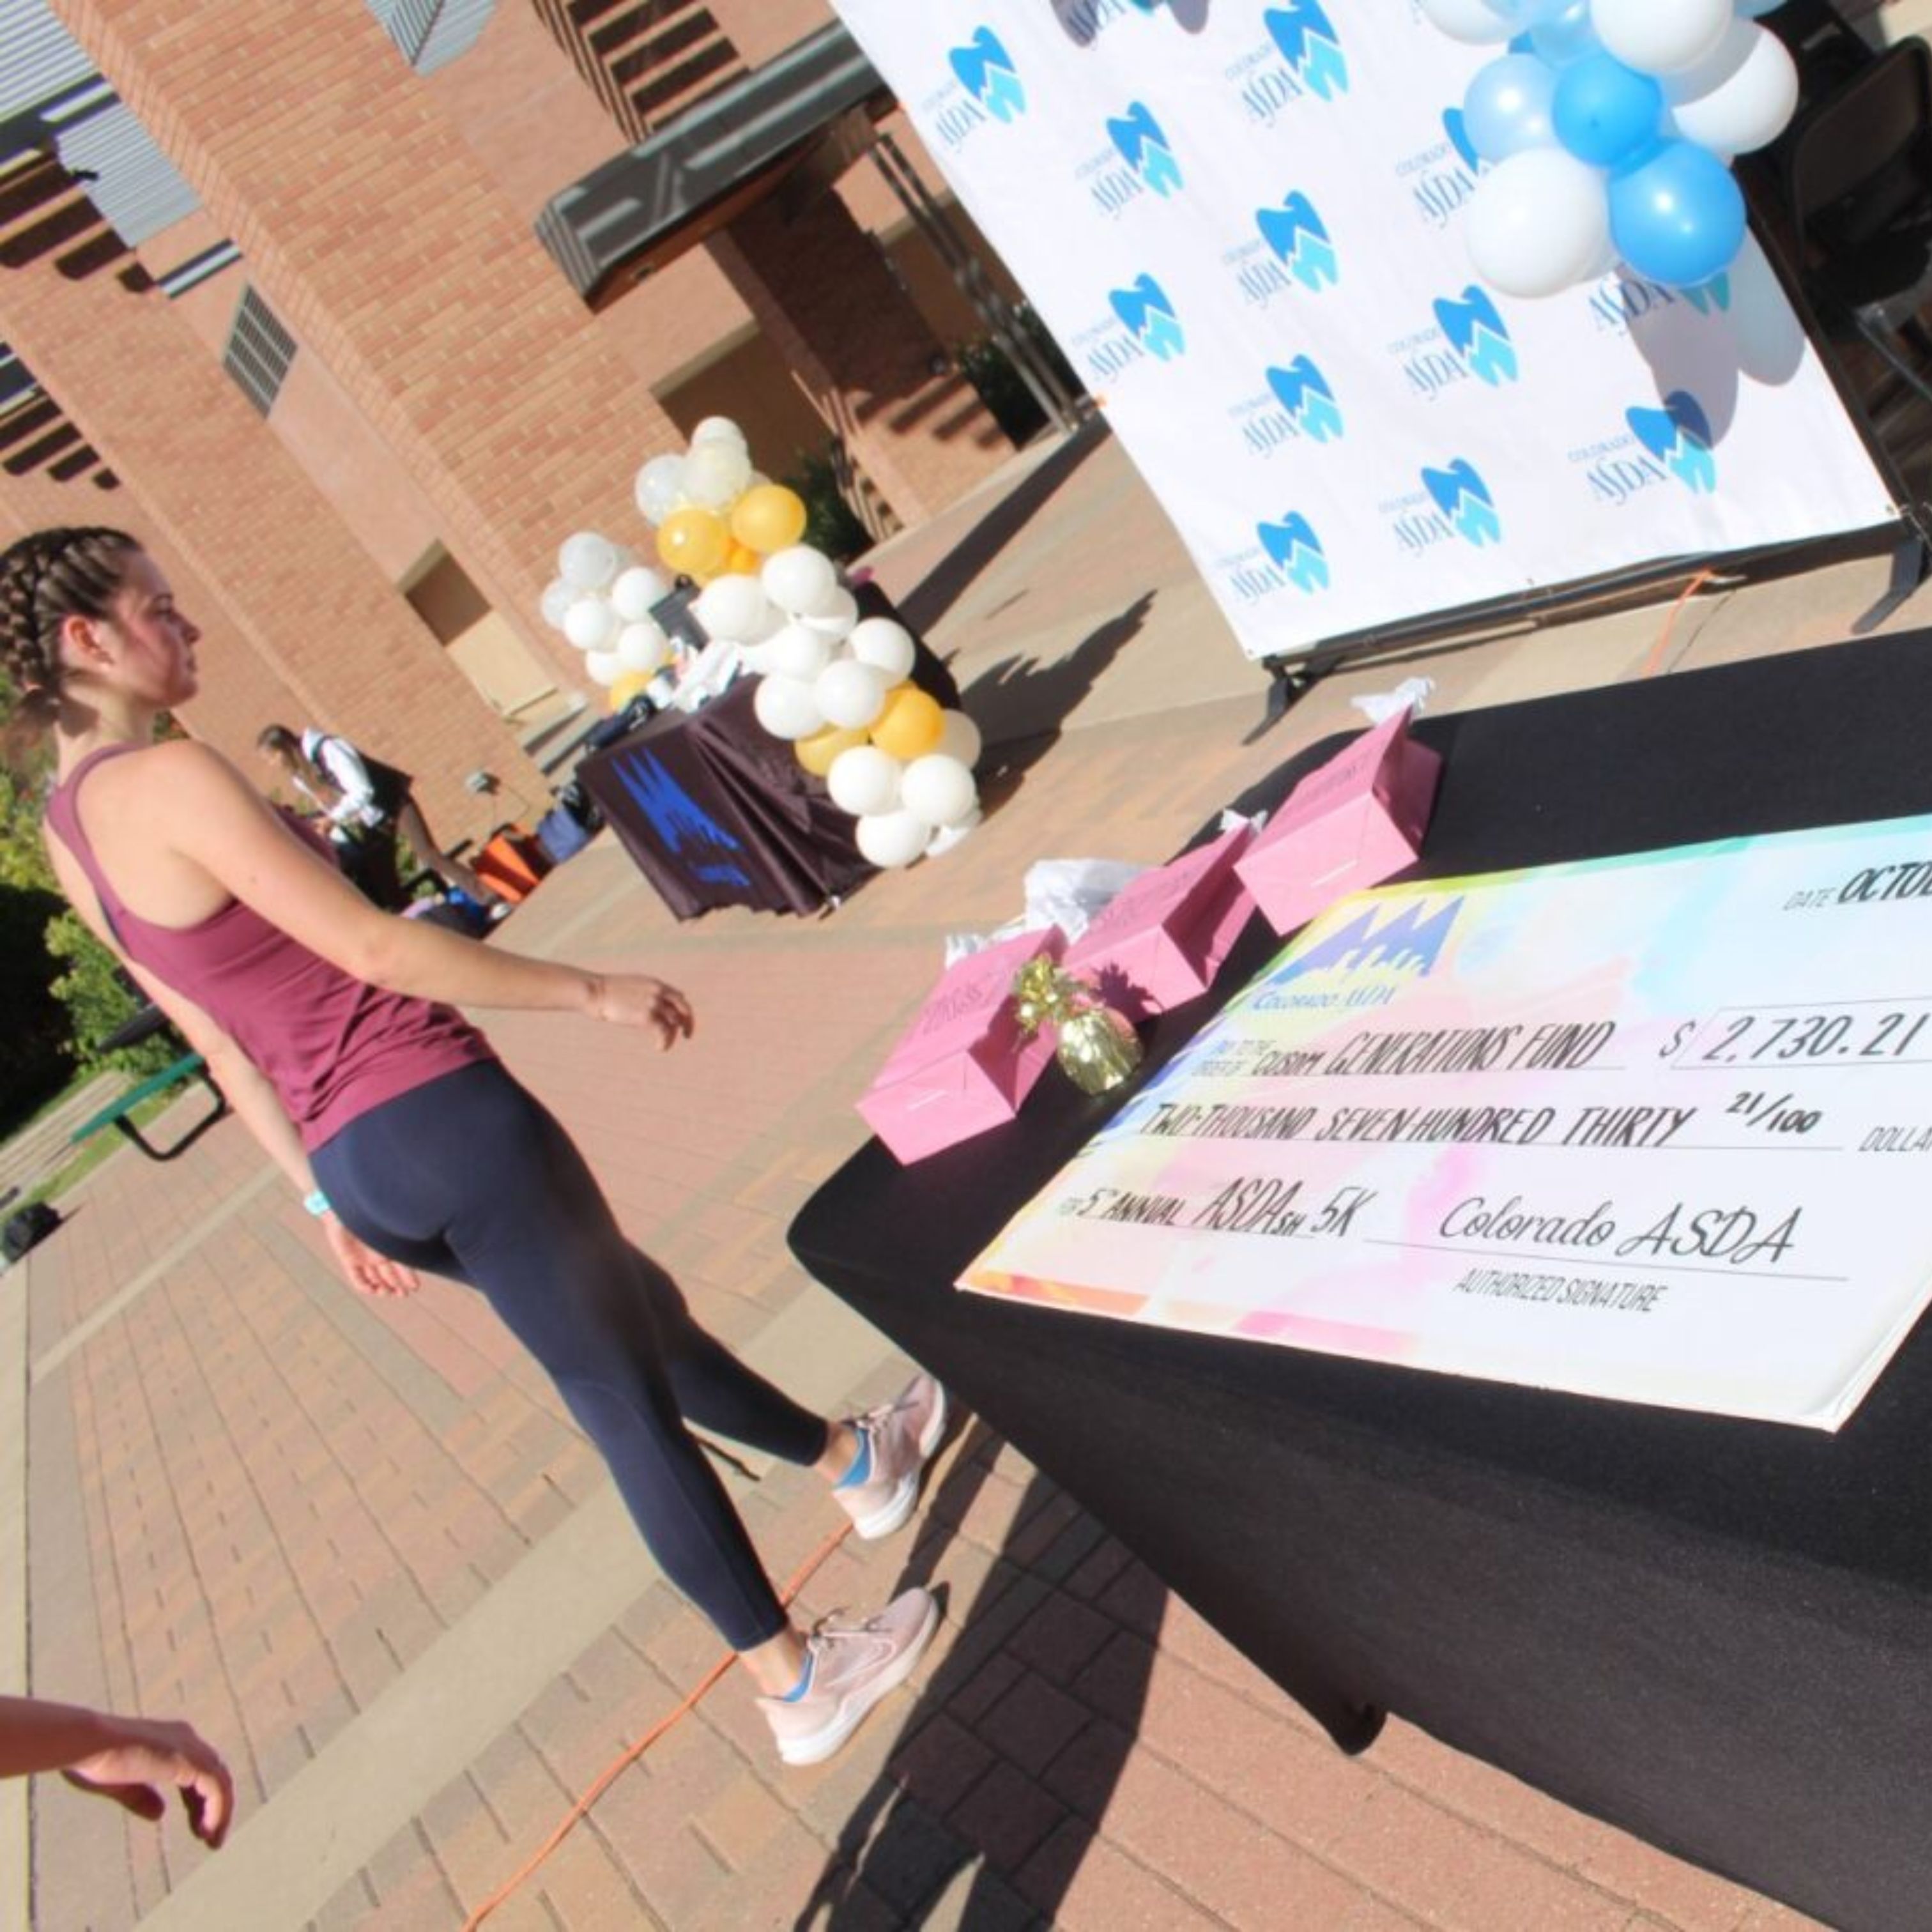 Student walks by a giant check laid out on a table, showing an amount of $2,730.21 from Colorado ASDA.